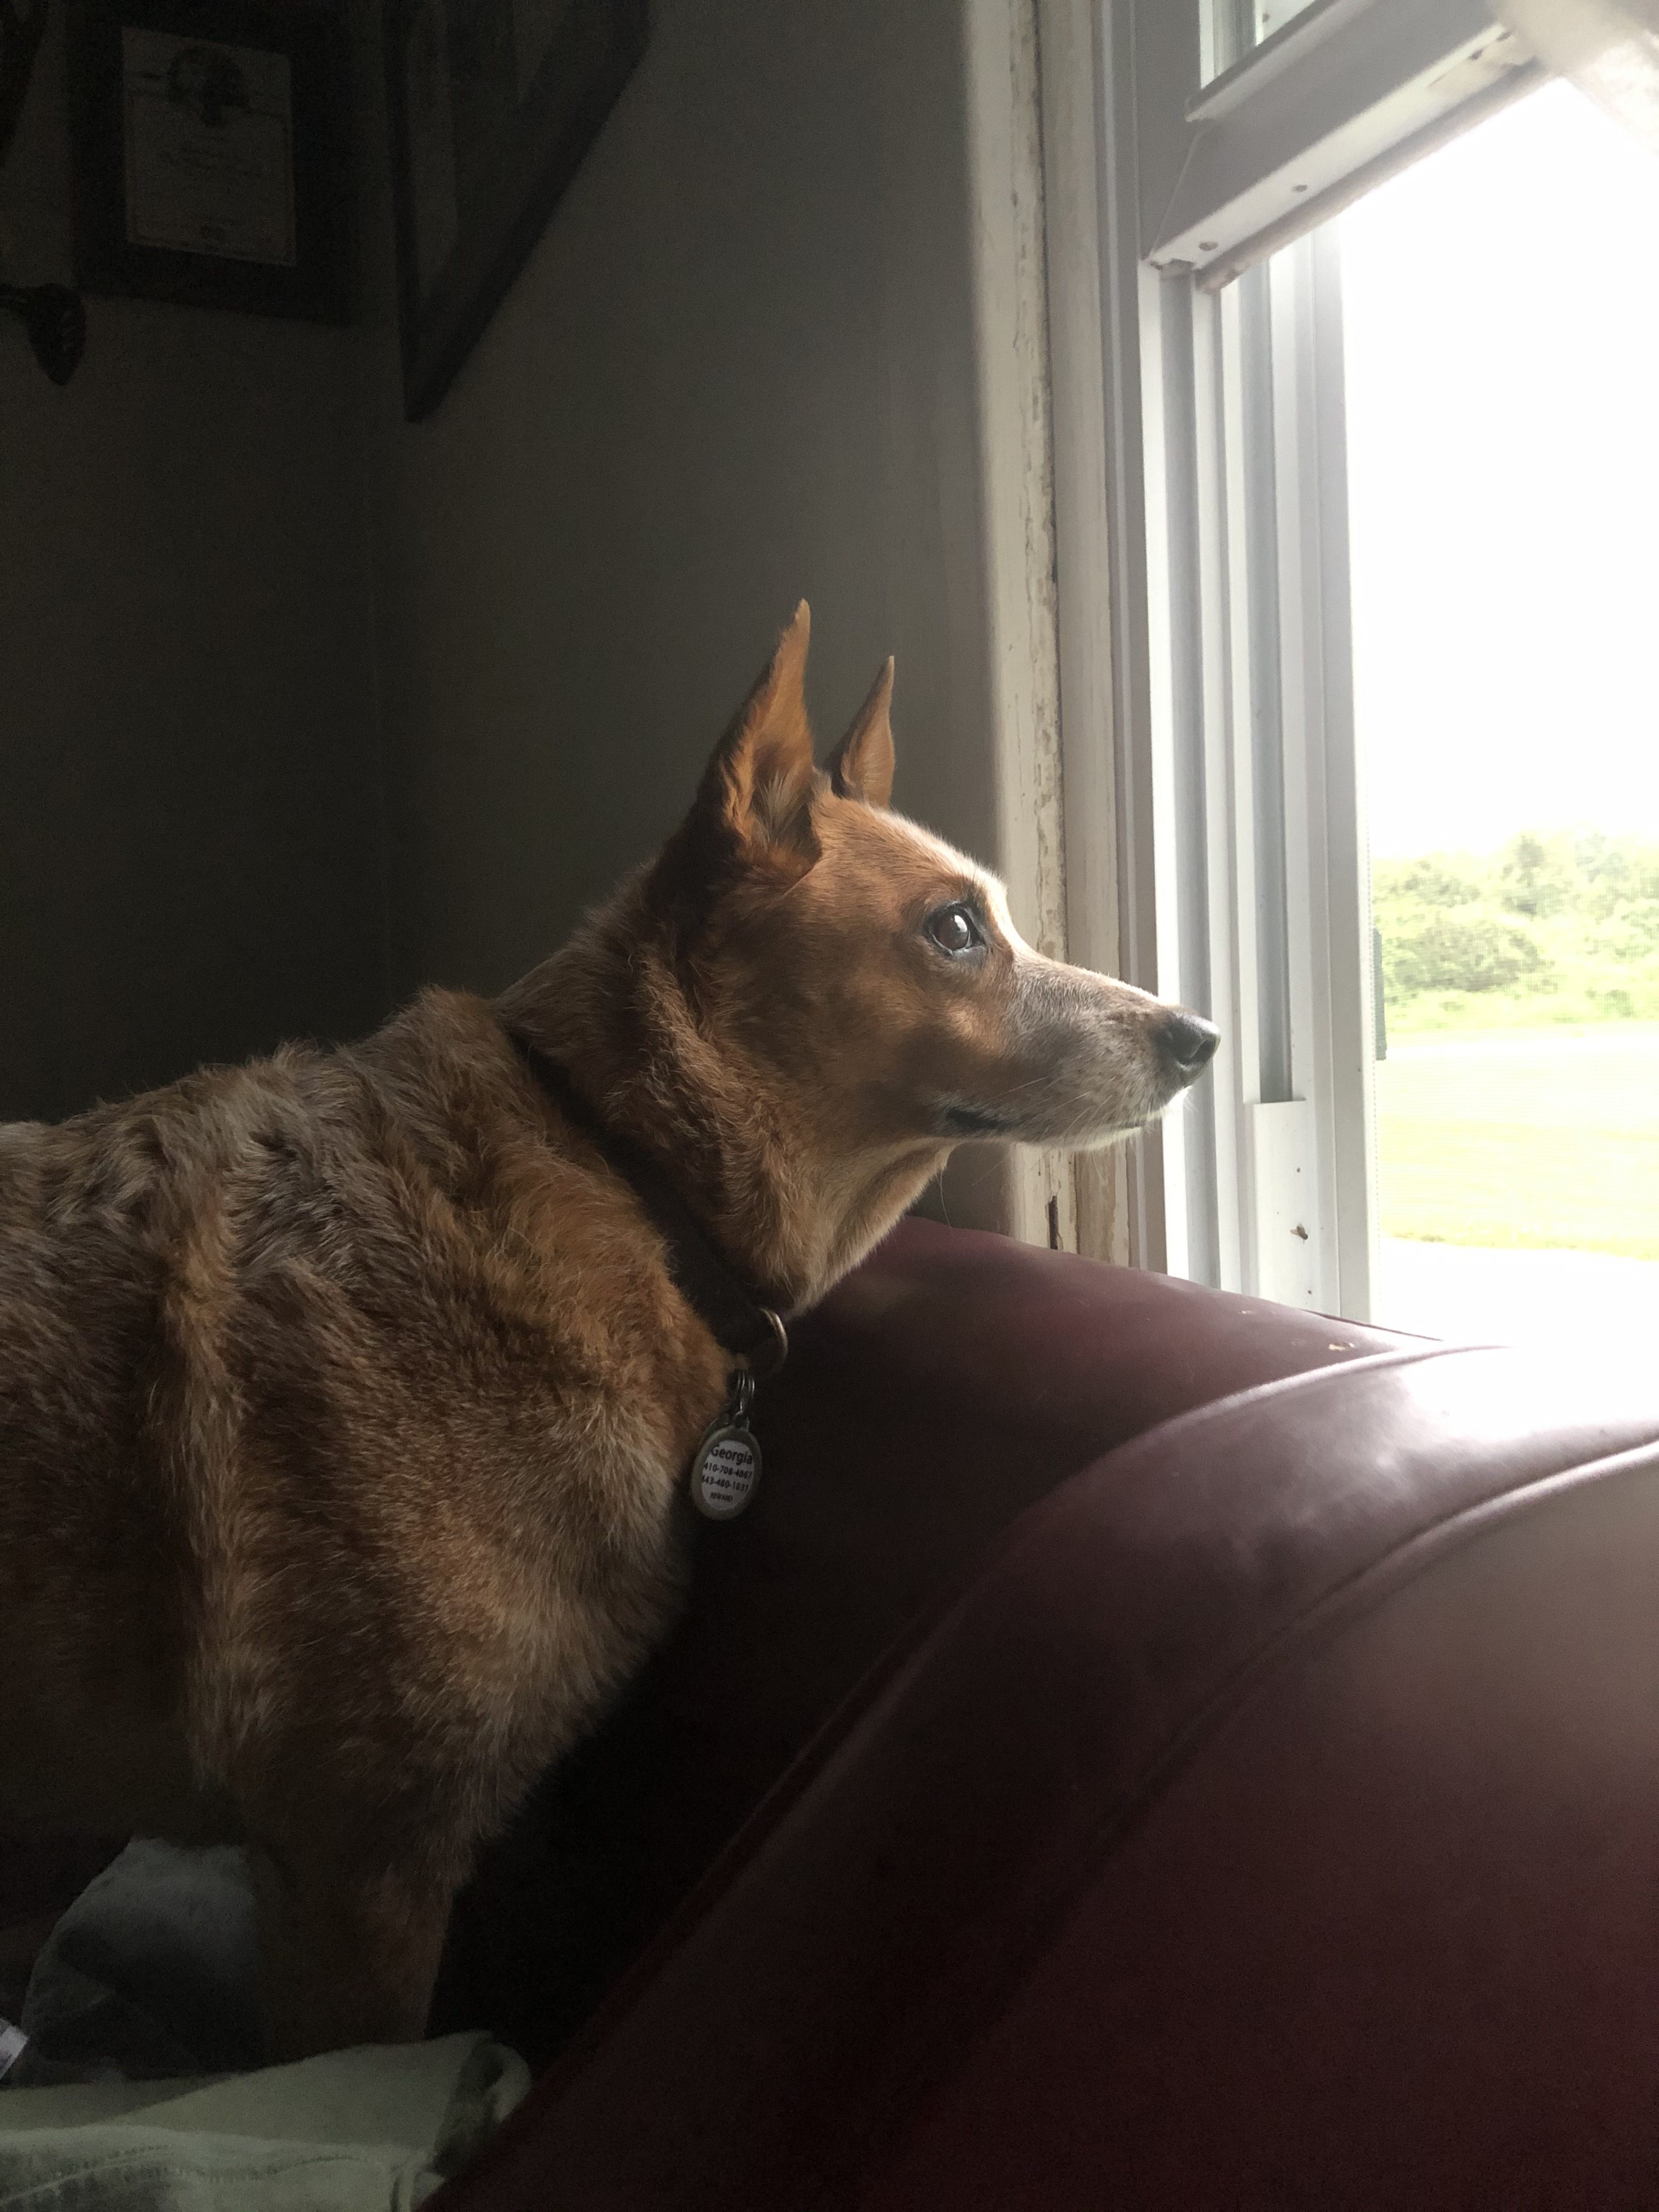 Dog looking out window